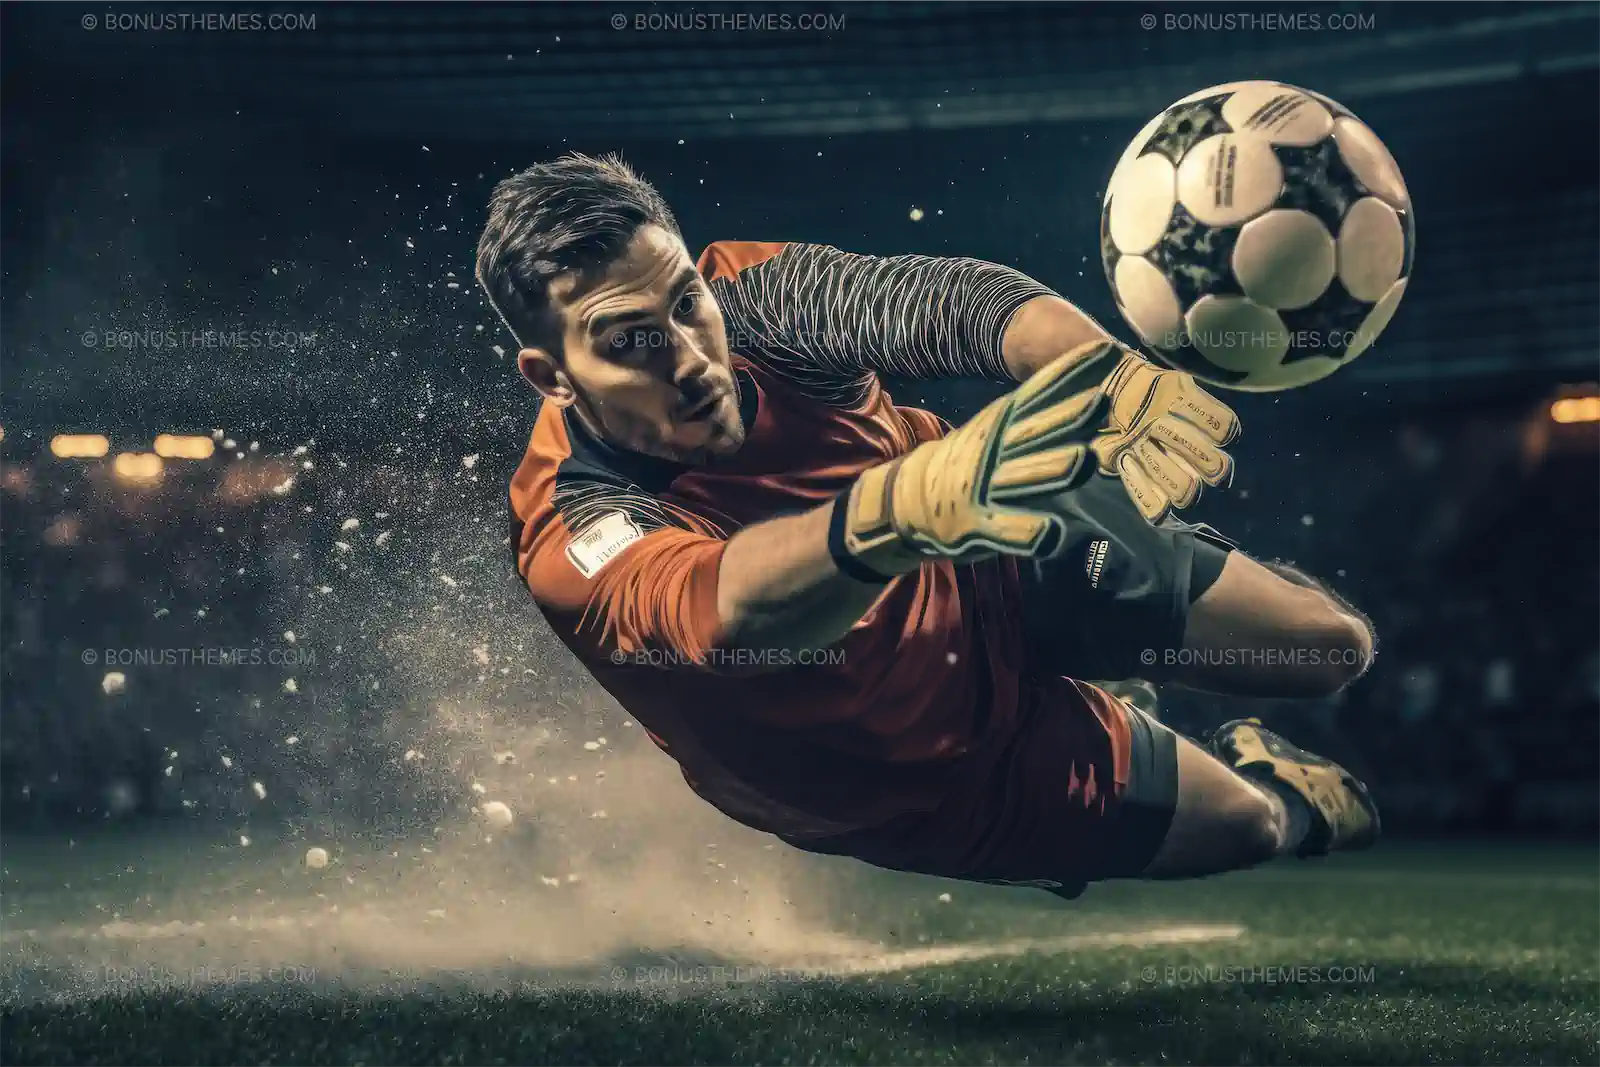 The goalkeeper saves the soccer ball